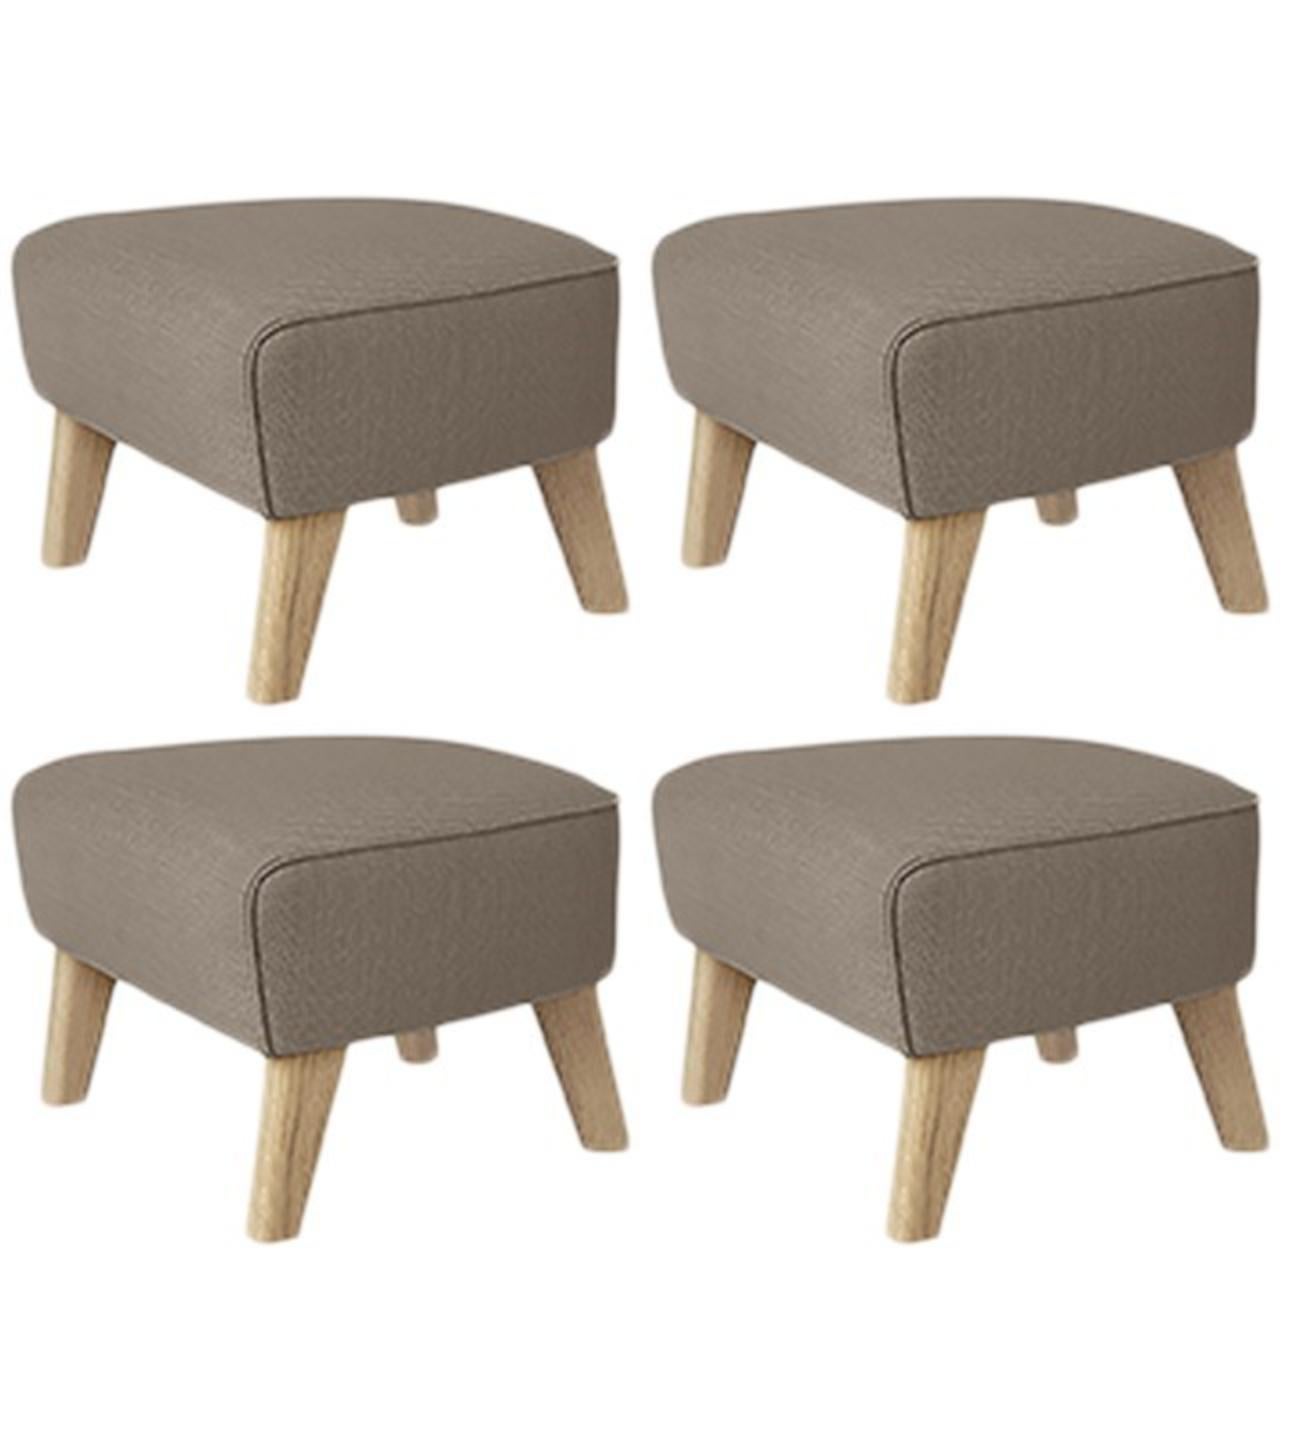 Set of 4 dark beige, natural oak RafSimonsVidar3 My Own Chair Footstool by Lassen
Dimensions: W 56 x D 58 x H 40 cm 
Materials: Textile, oak
Also available: other colors available.

The My Own Chair Footstool has been designed in the same